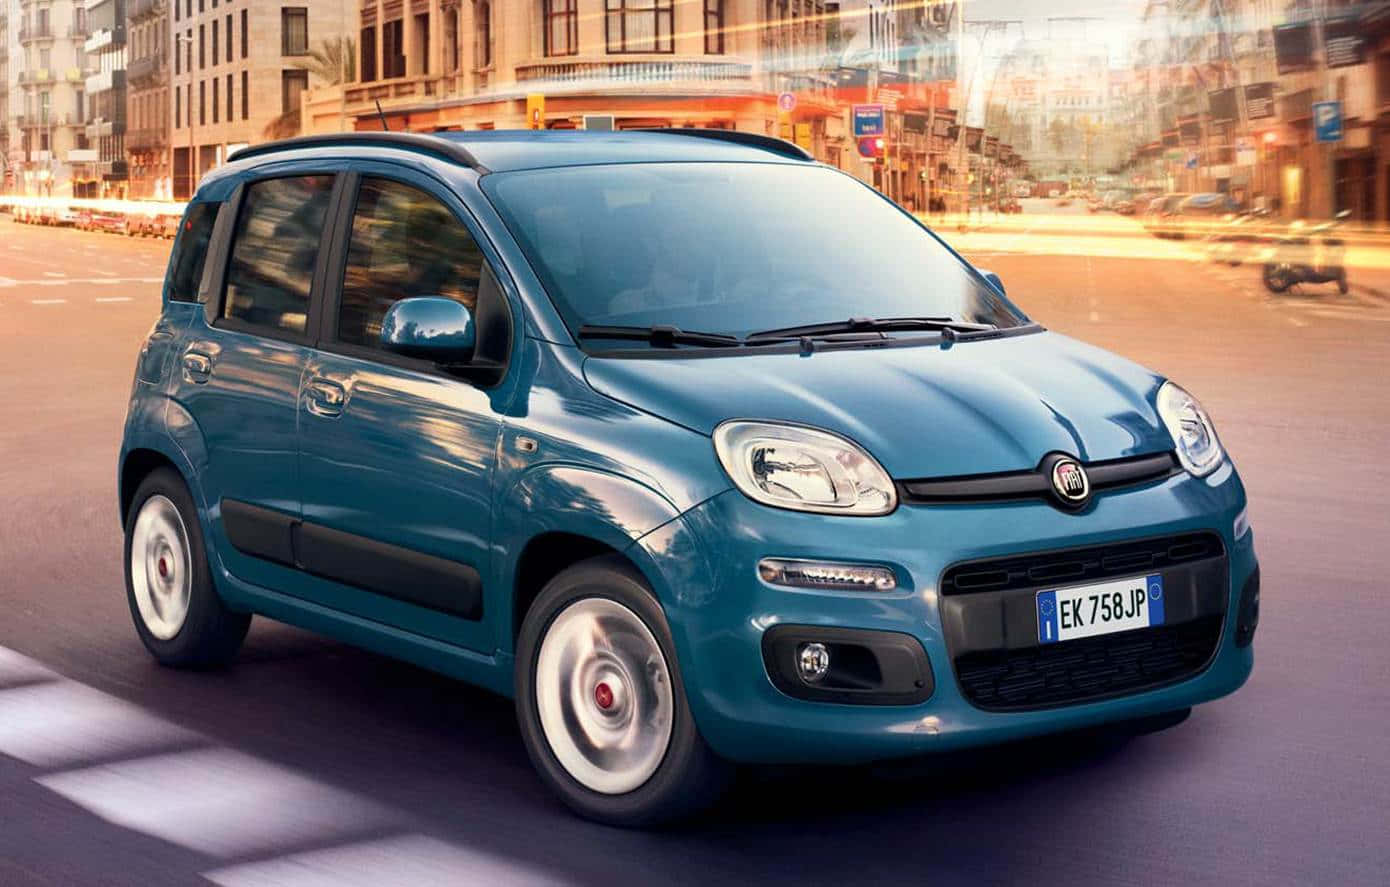 Fiat Panda driving on a road during daytime Wallpaper